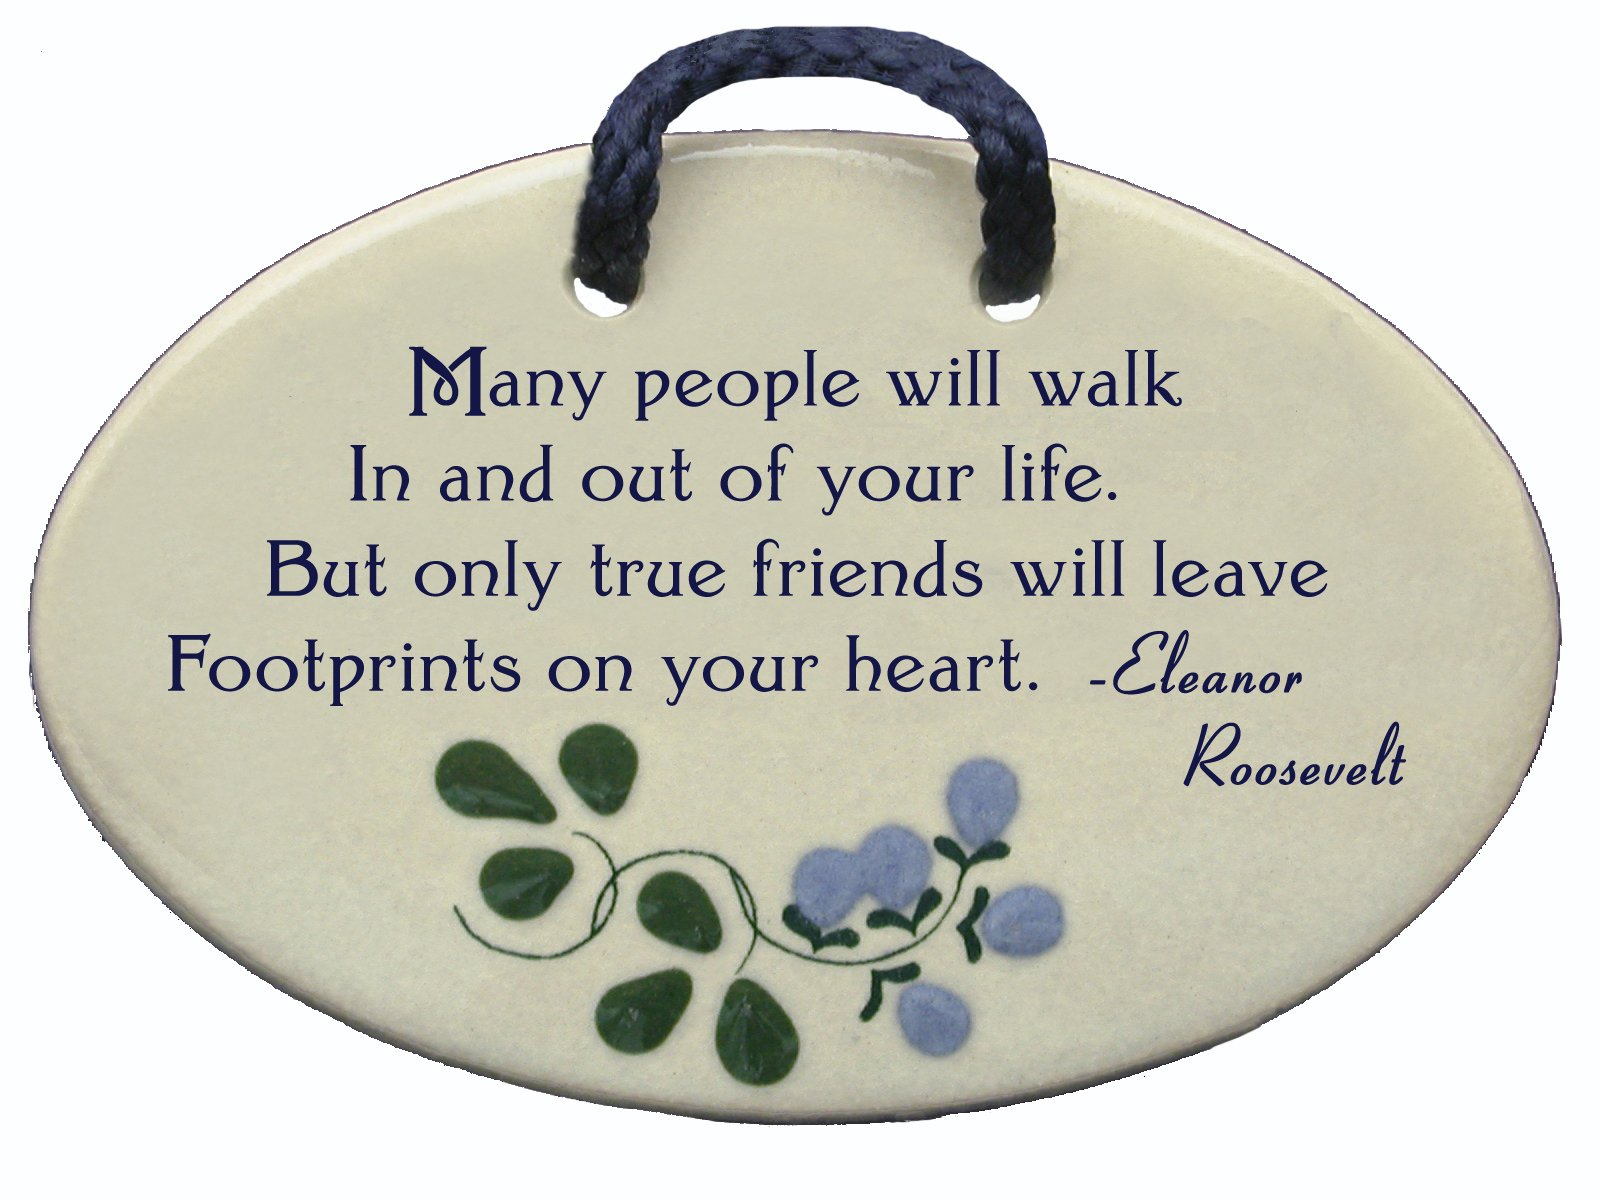 Book Cover Many people will walk In and out of your life. But only true friends will leave Footprints on your heart. Eleanor Roosevelt. Ceramic wall plaques handmade in the USA for over 30 years.